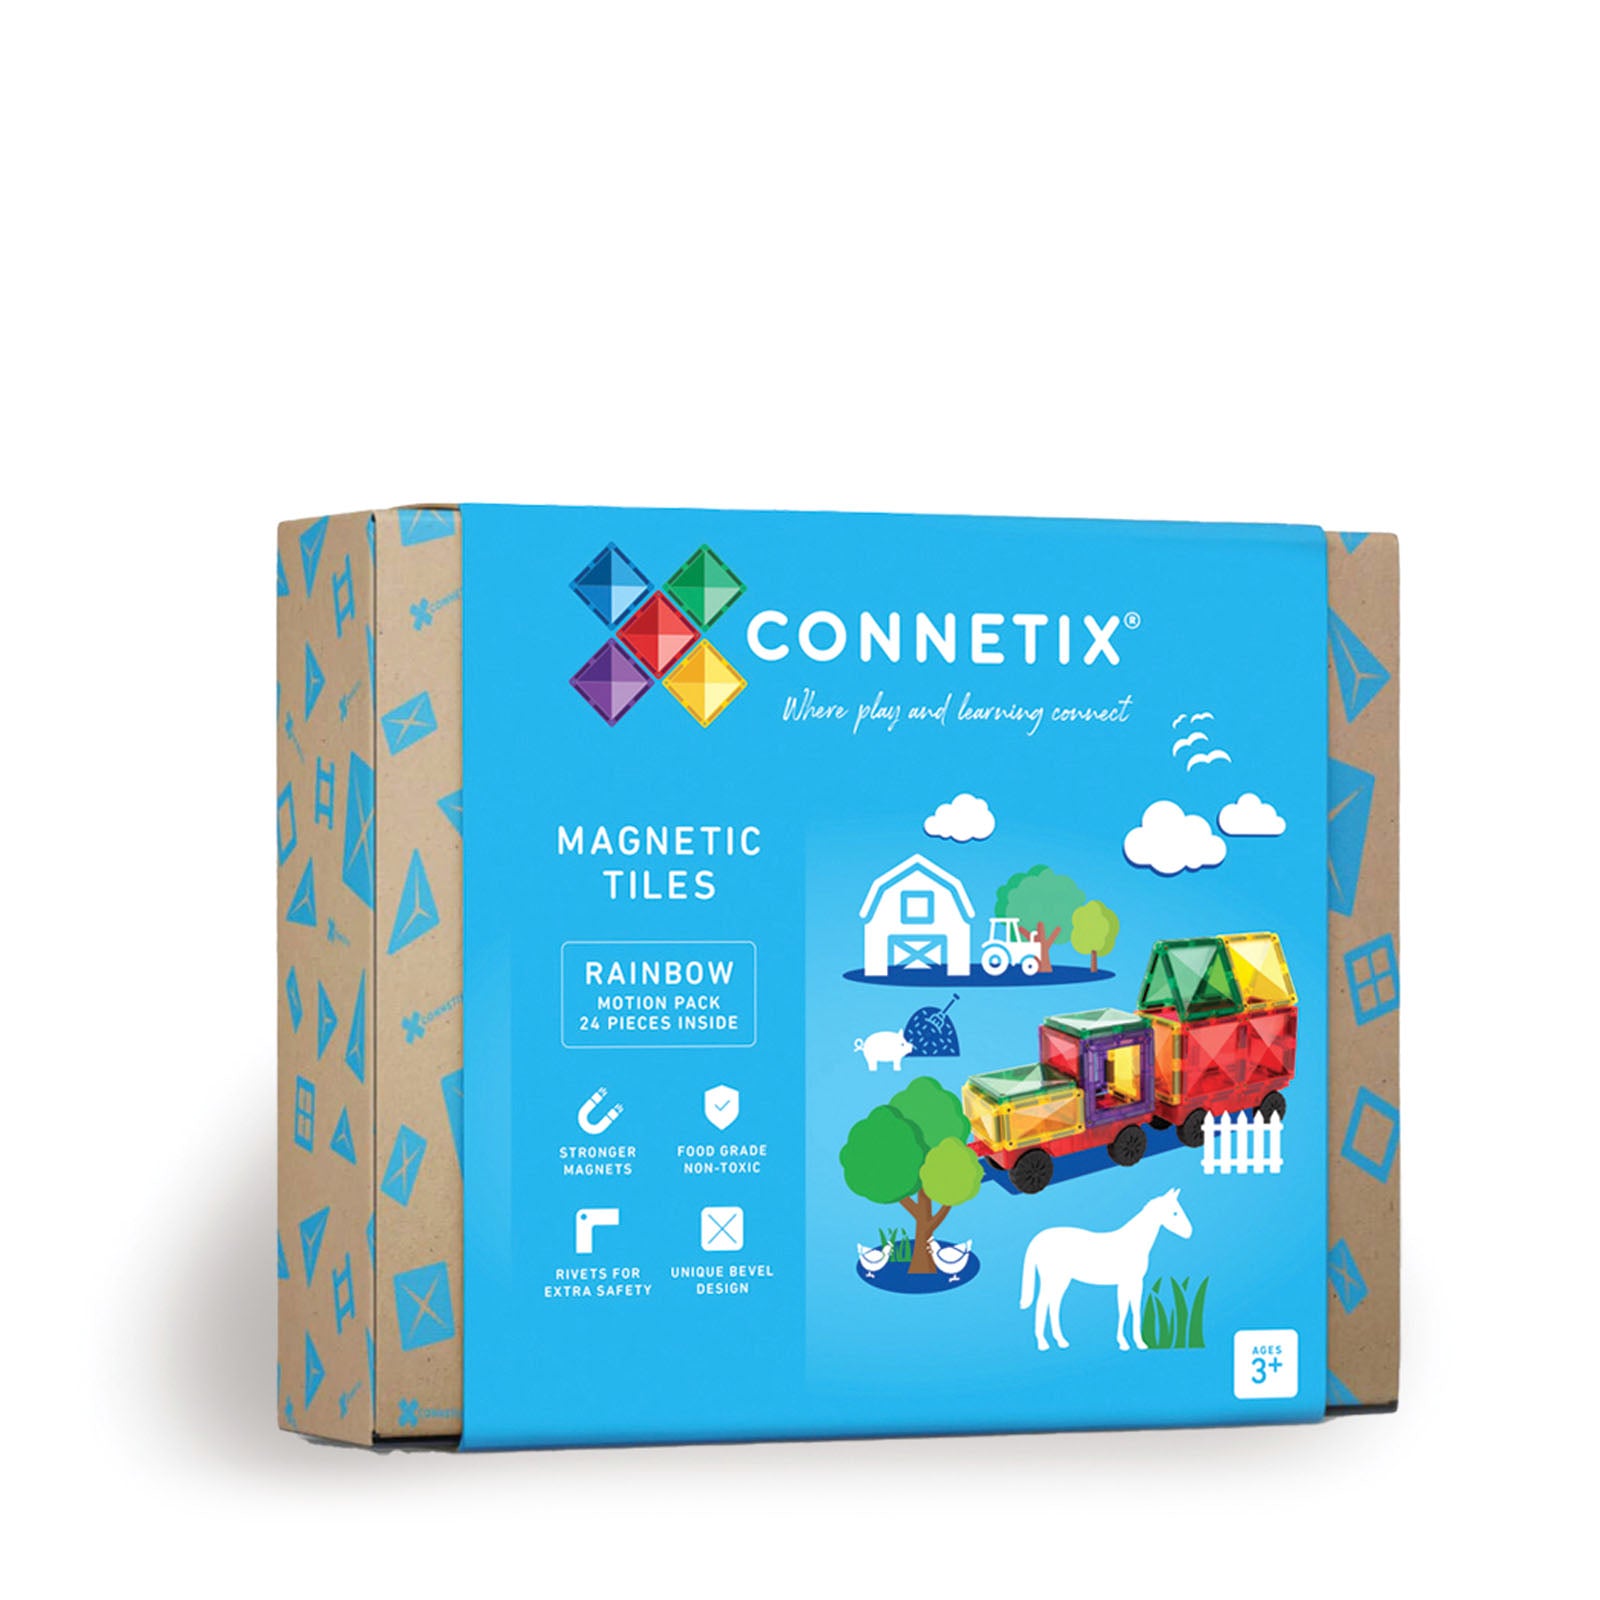 Magnetic Tiles Rainbow Motion Pack - 24 Pieces